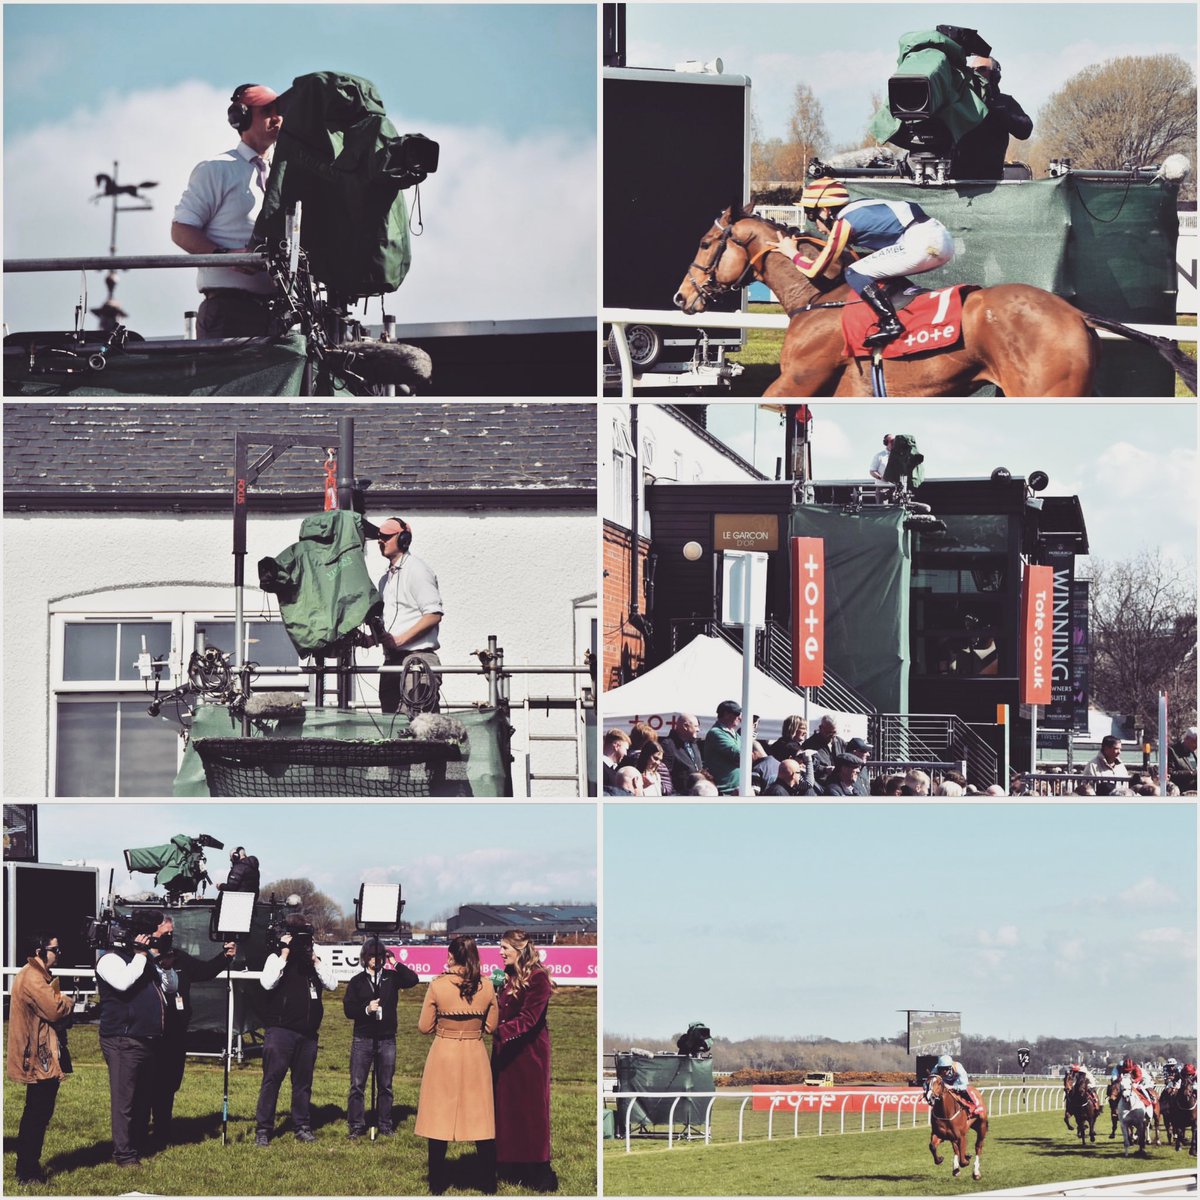 Trip to Scotland for the crew last week to 
@MusselburghRace in preparation for yesterdays Queens Cup Day with the @itvracing & @NEP_UKI teams…..

Once again @stevechalles coming good with the Race Day action photos ! 

Thanks Steve 

#Scotland #musselburghraces